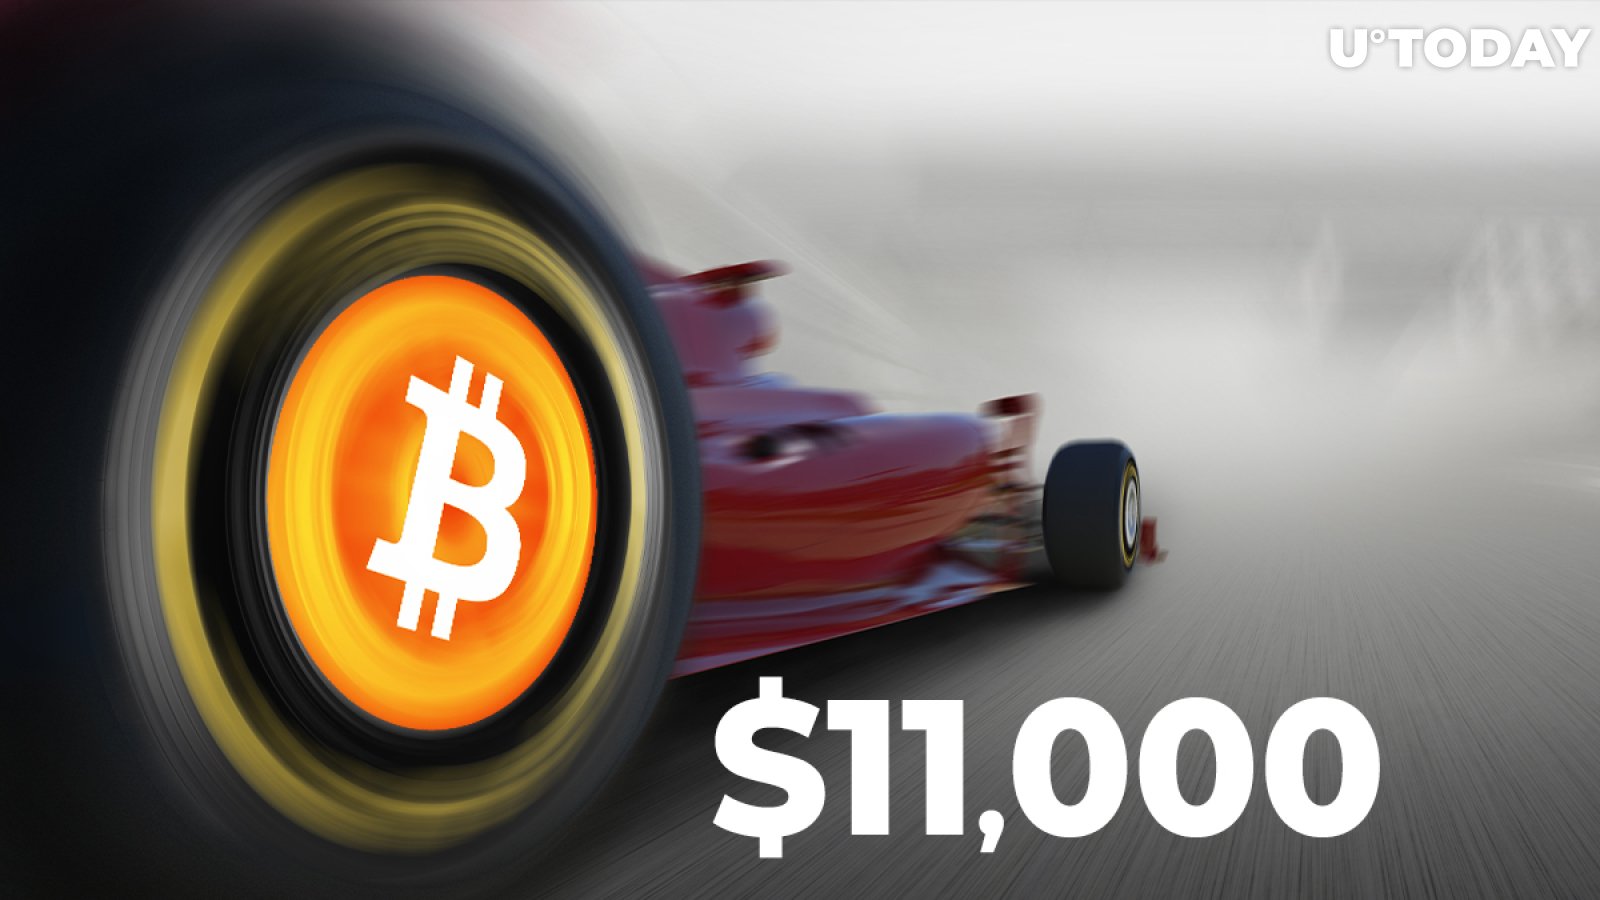 Bitcoin Price Has Good Chance to Rally Above $11,000 if This Scenario Plays Out